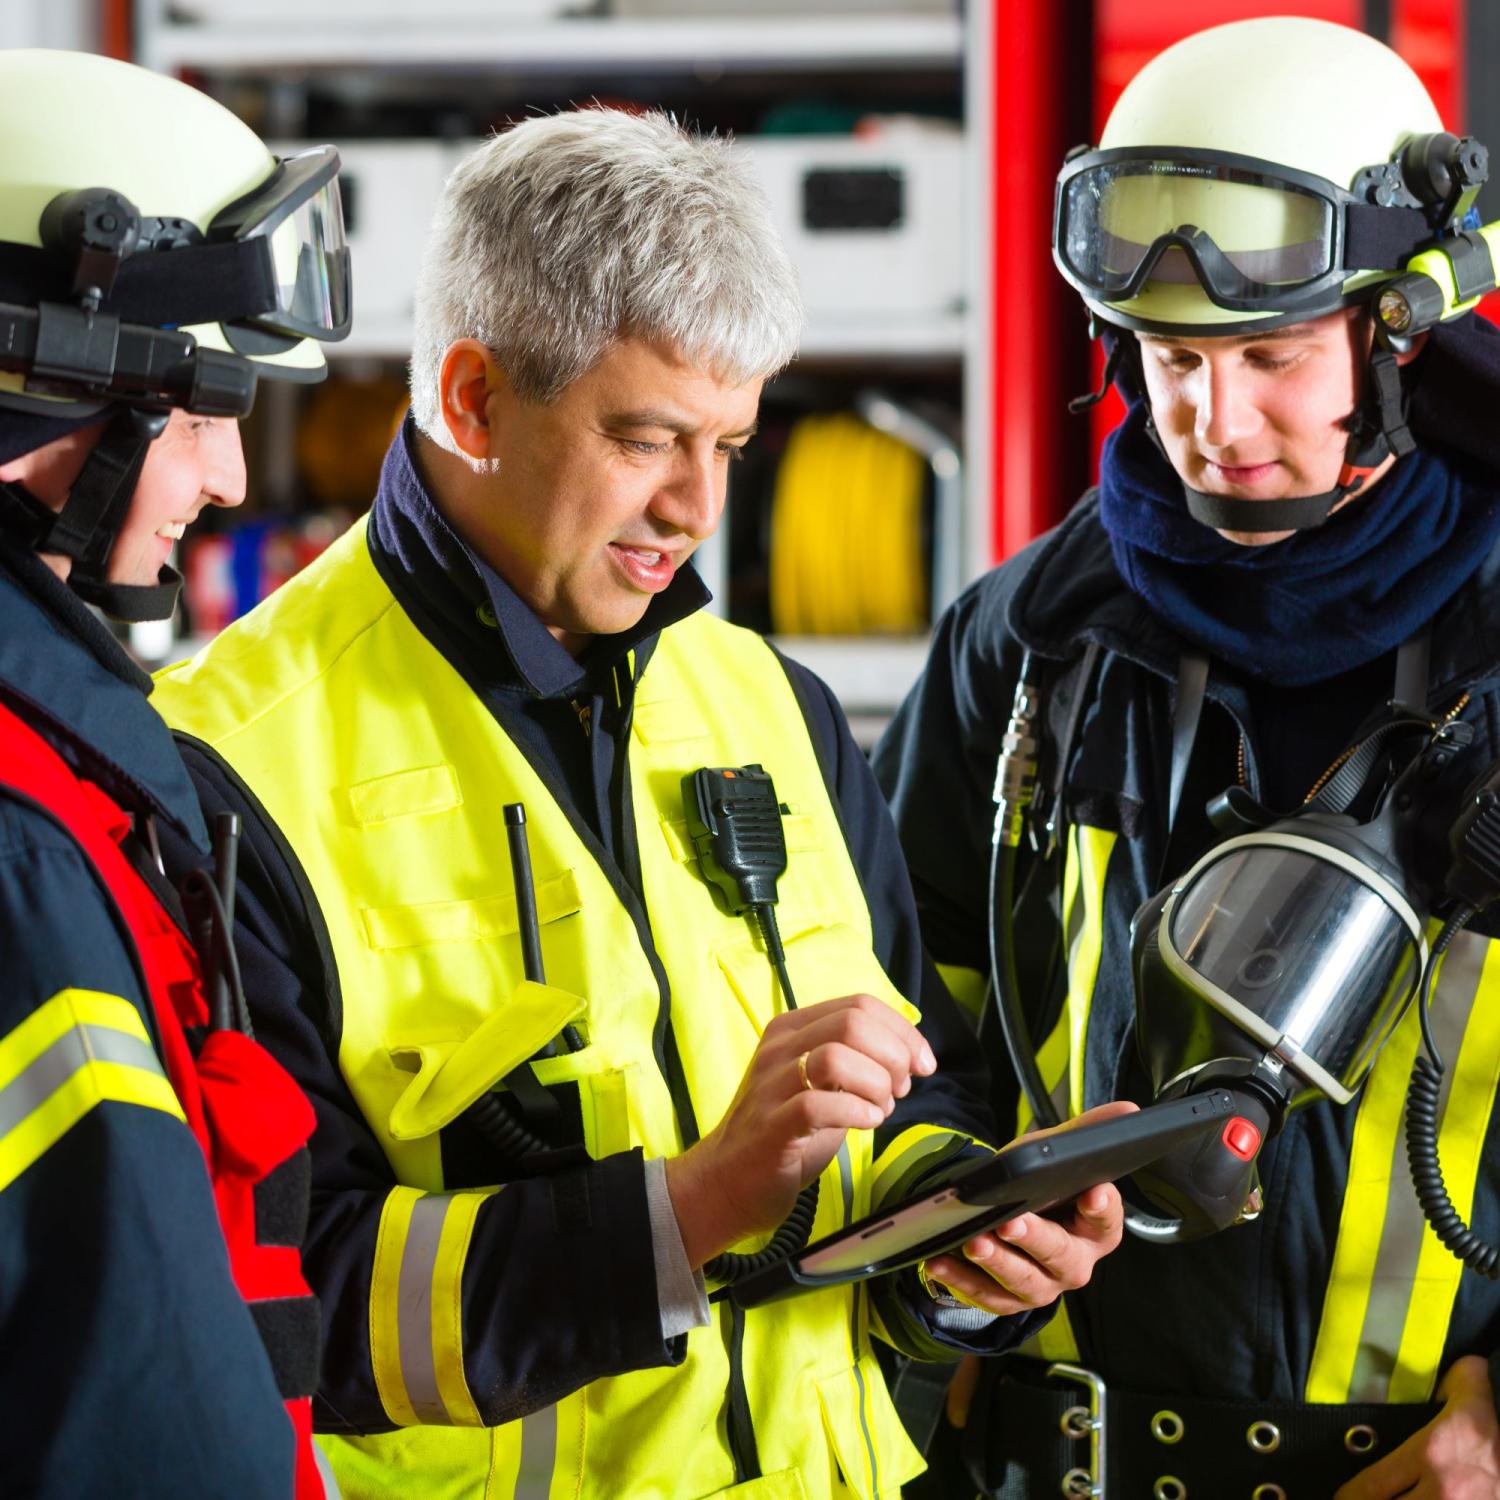 First responders viewing a tablet